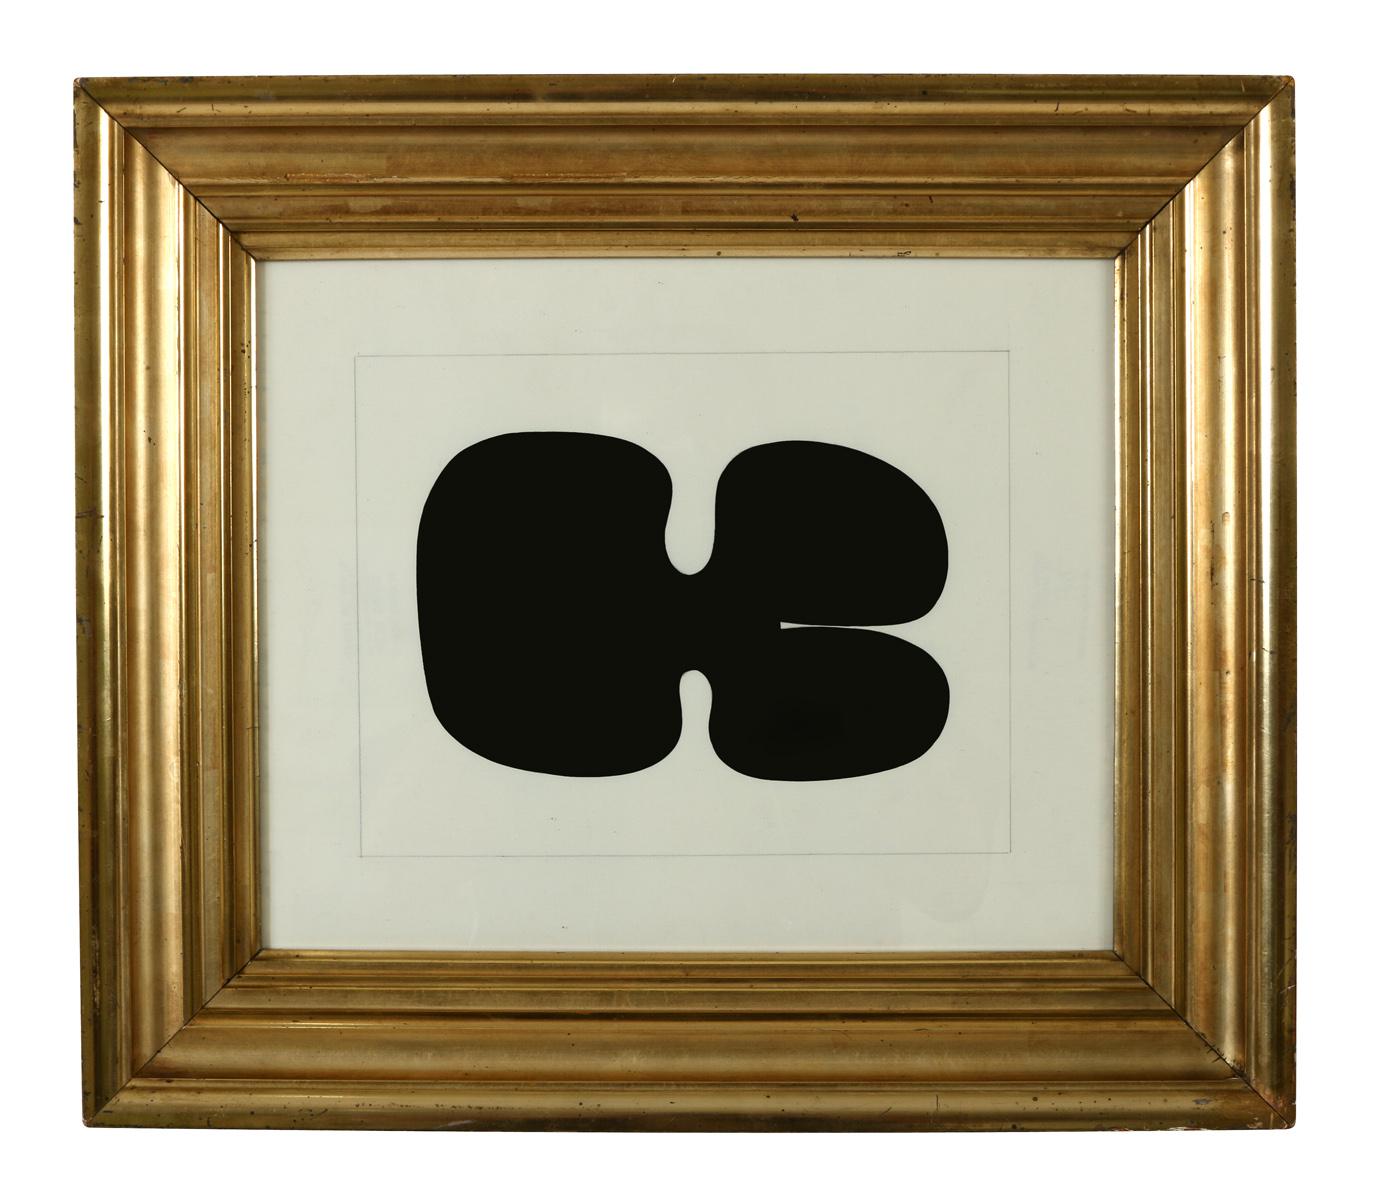 An abstract gouache work in black and white. The juxtaposition of the contemporary work in a traditional gilt wood frame make this piece quite striking. One of three similar works in our inventory.